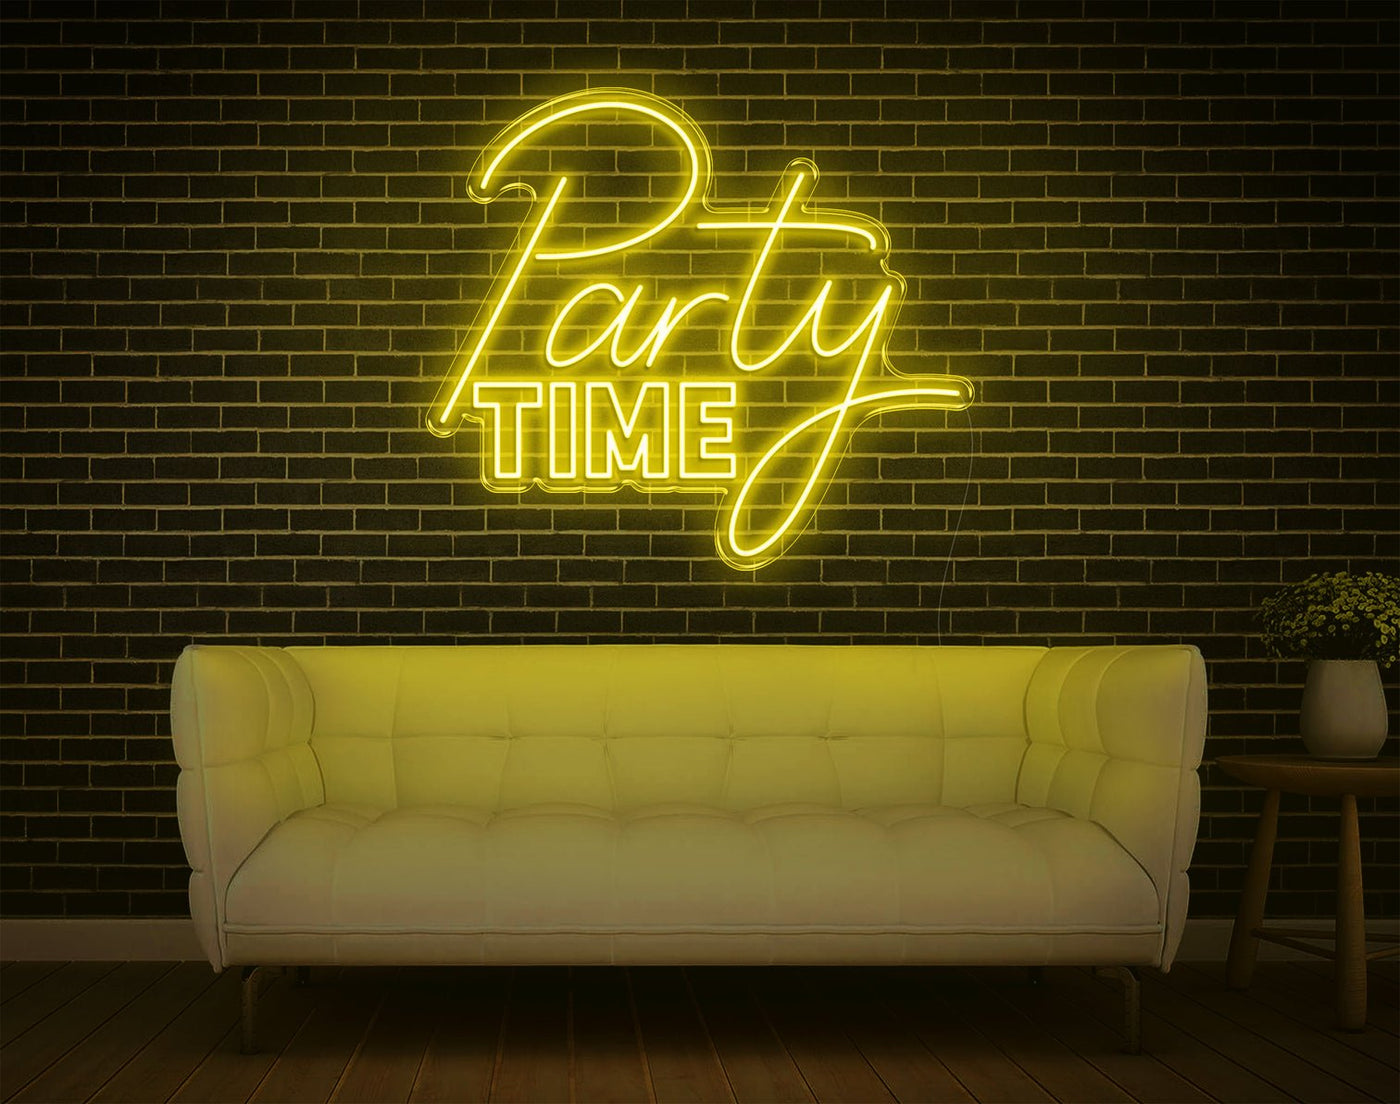 Party Time LED Neon Sign - 27inch x 31inchYellow